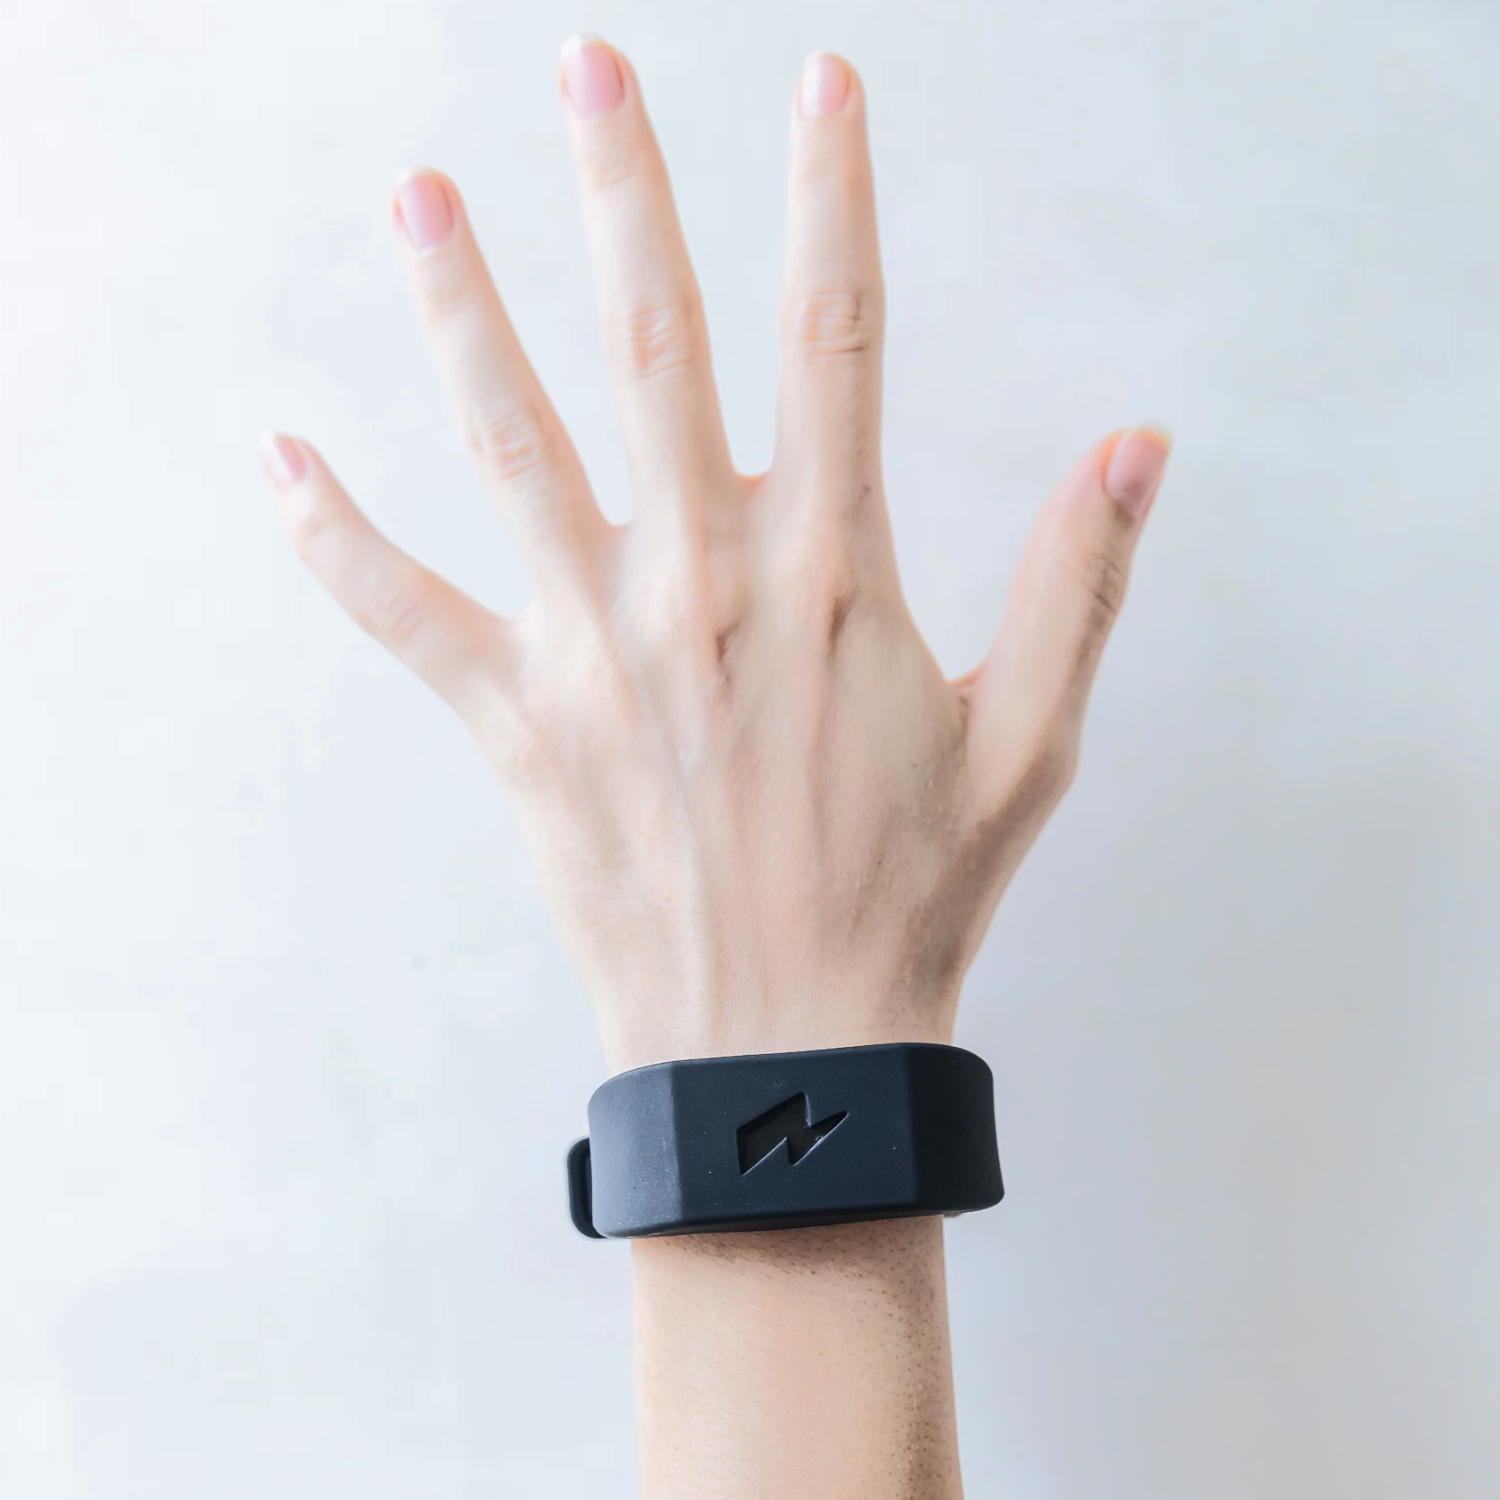 Amazon sells bracelet that shocks users for eating too much fast food |  Trending & Viral News